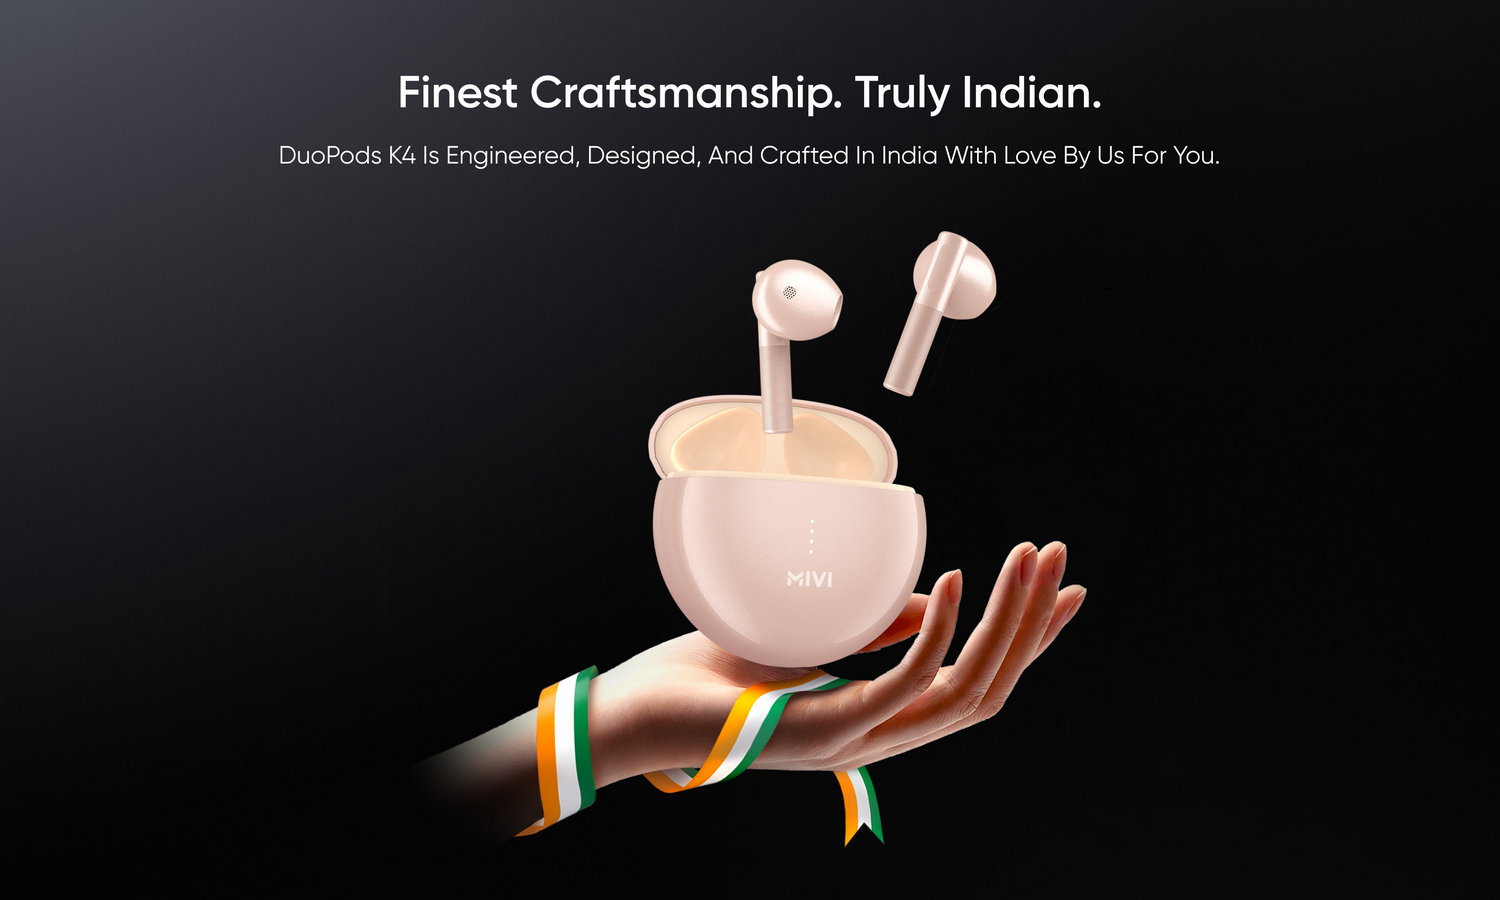 Finest Craftsmanship. Truly Indian.
DuoPods K4 is engineered, designed, and crafted in India with love by us for you.